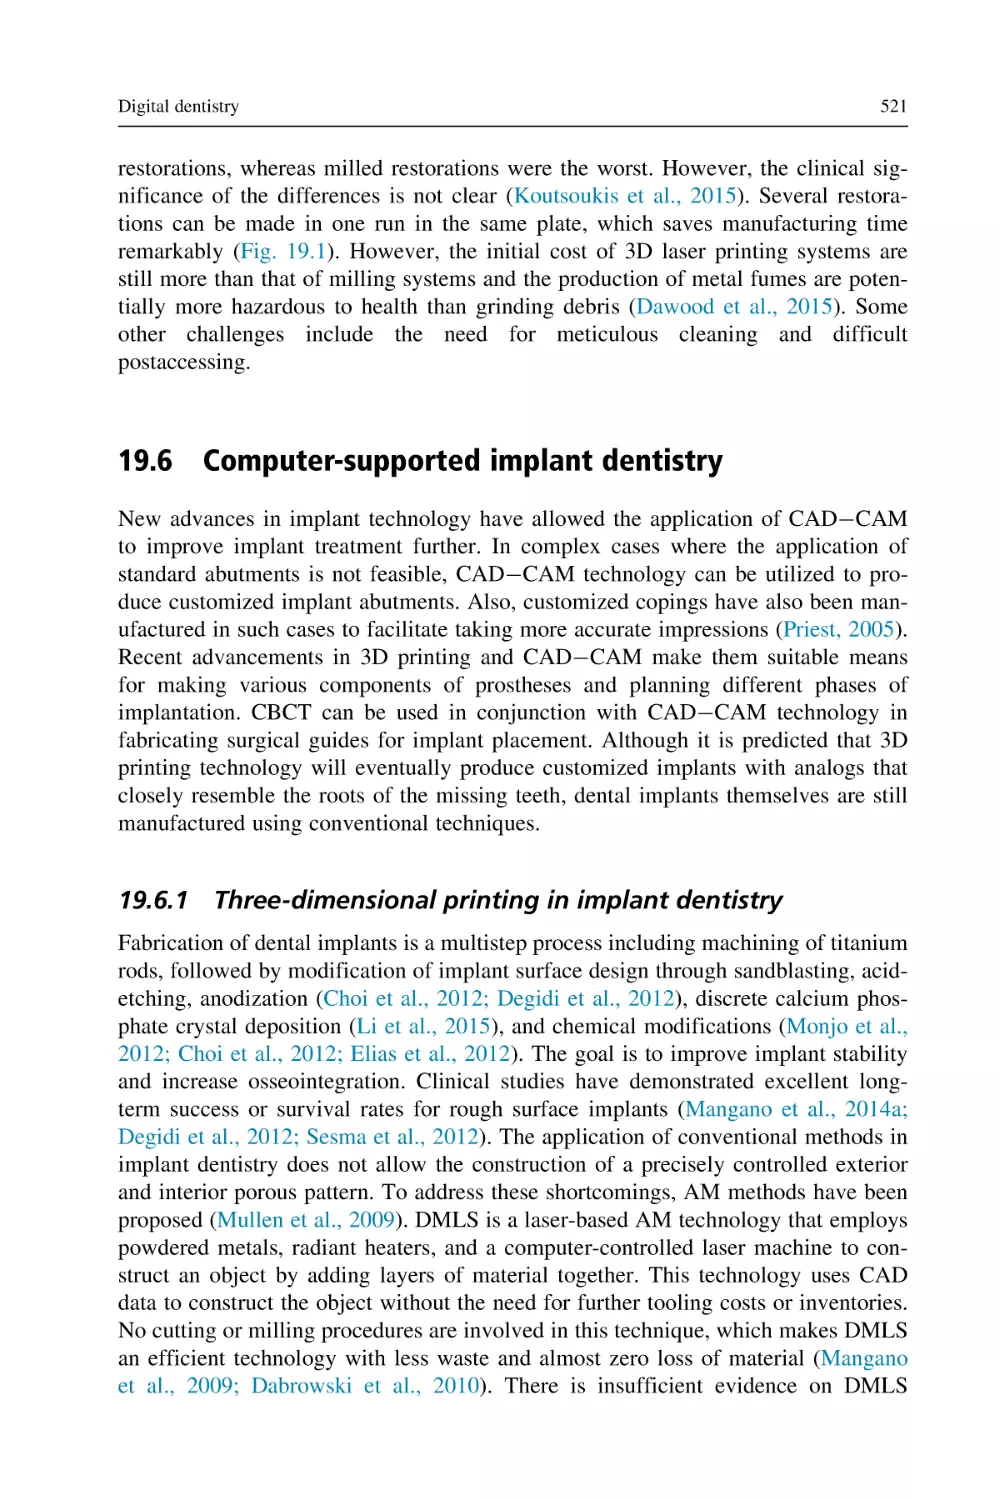 19.6 Computer-supported implant dentistry
19.6.1 Three-dimensional printing in implant dentistry